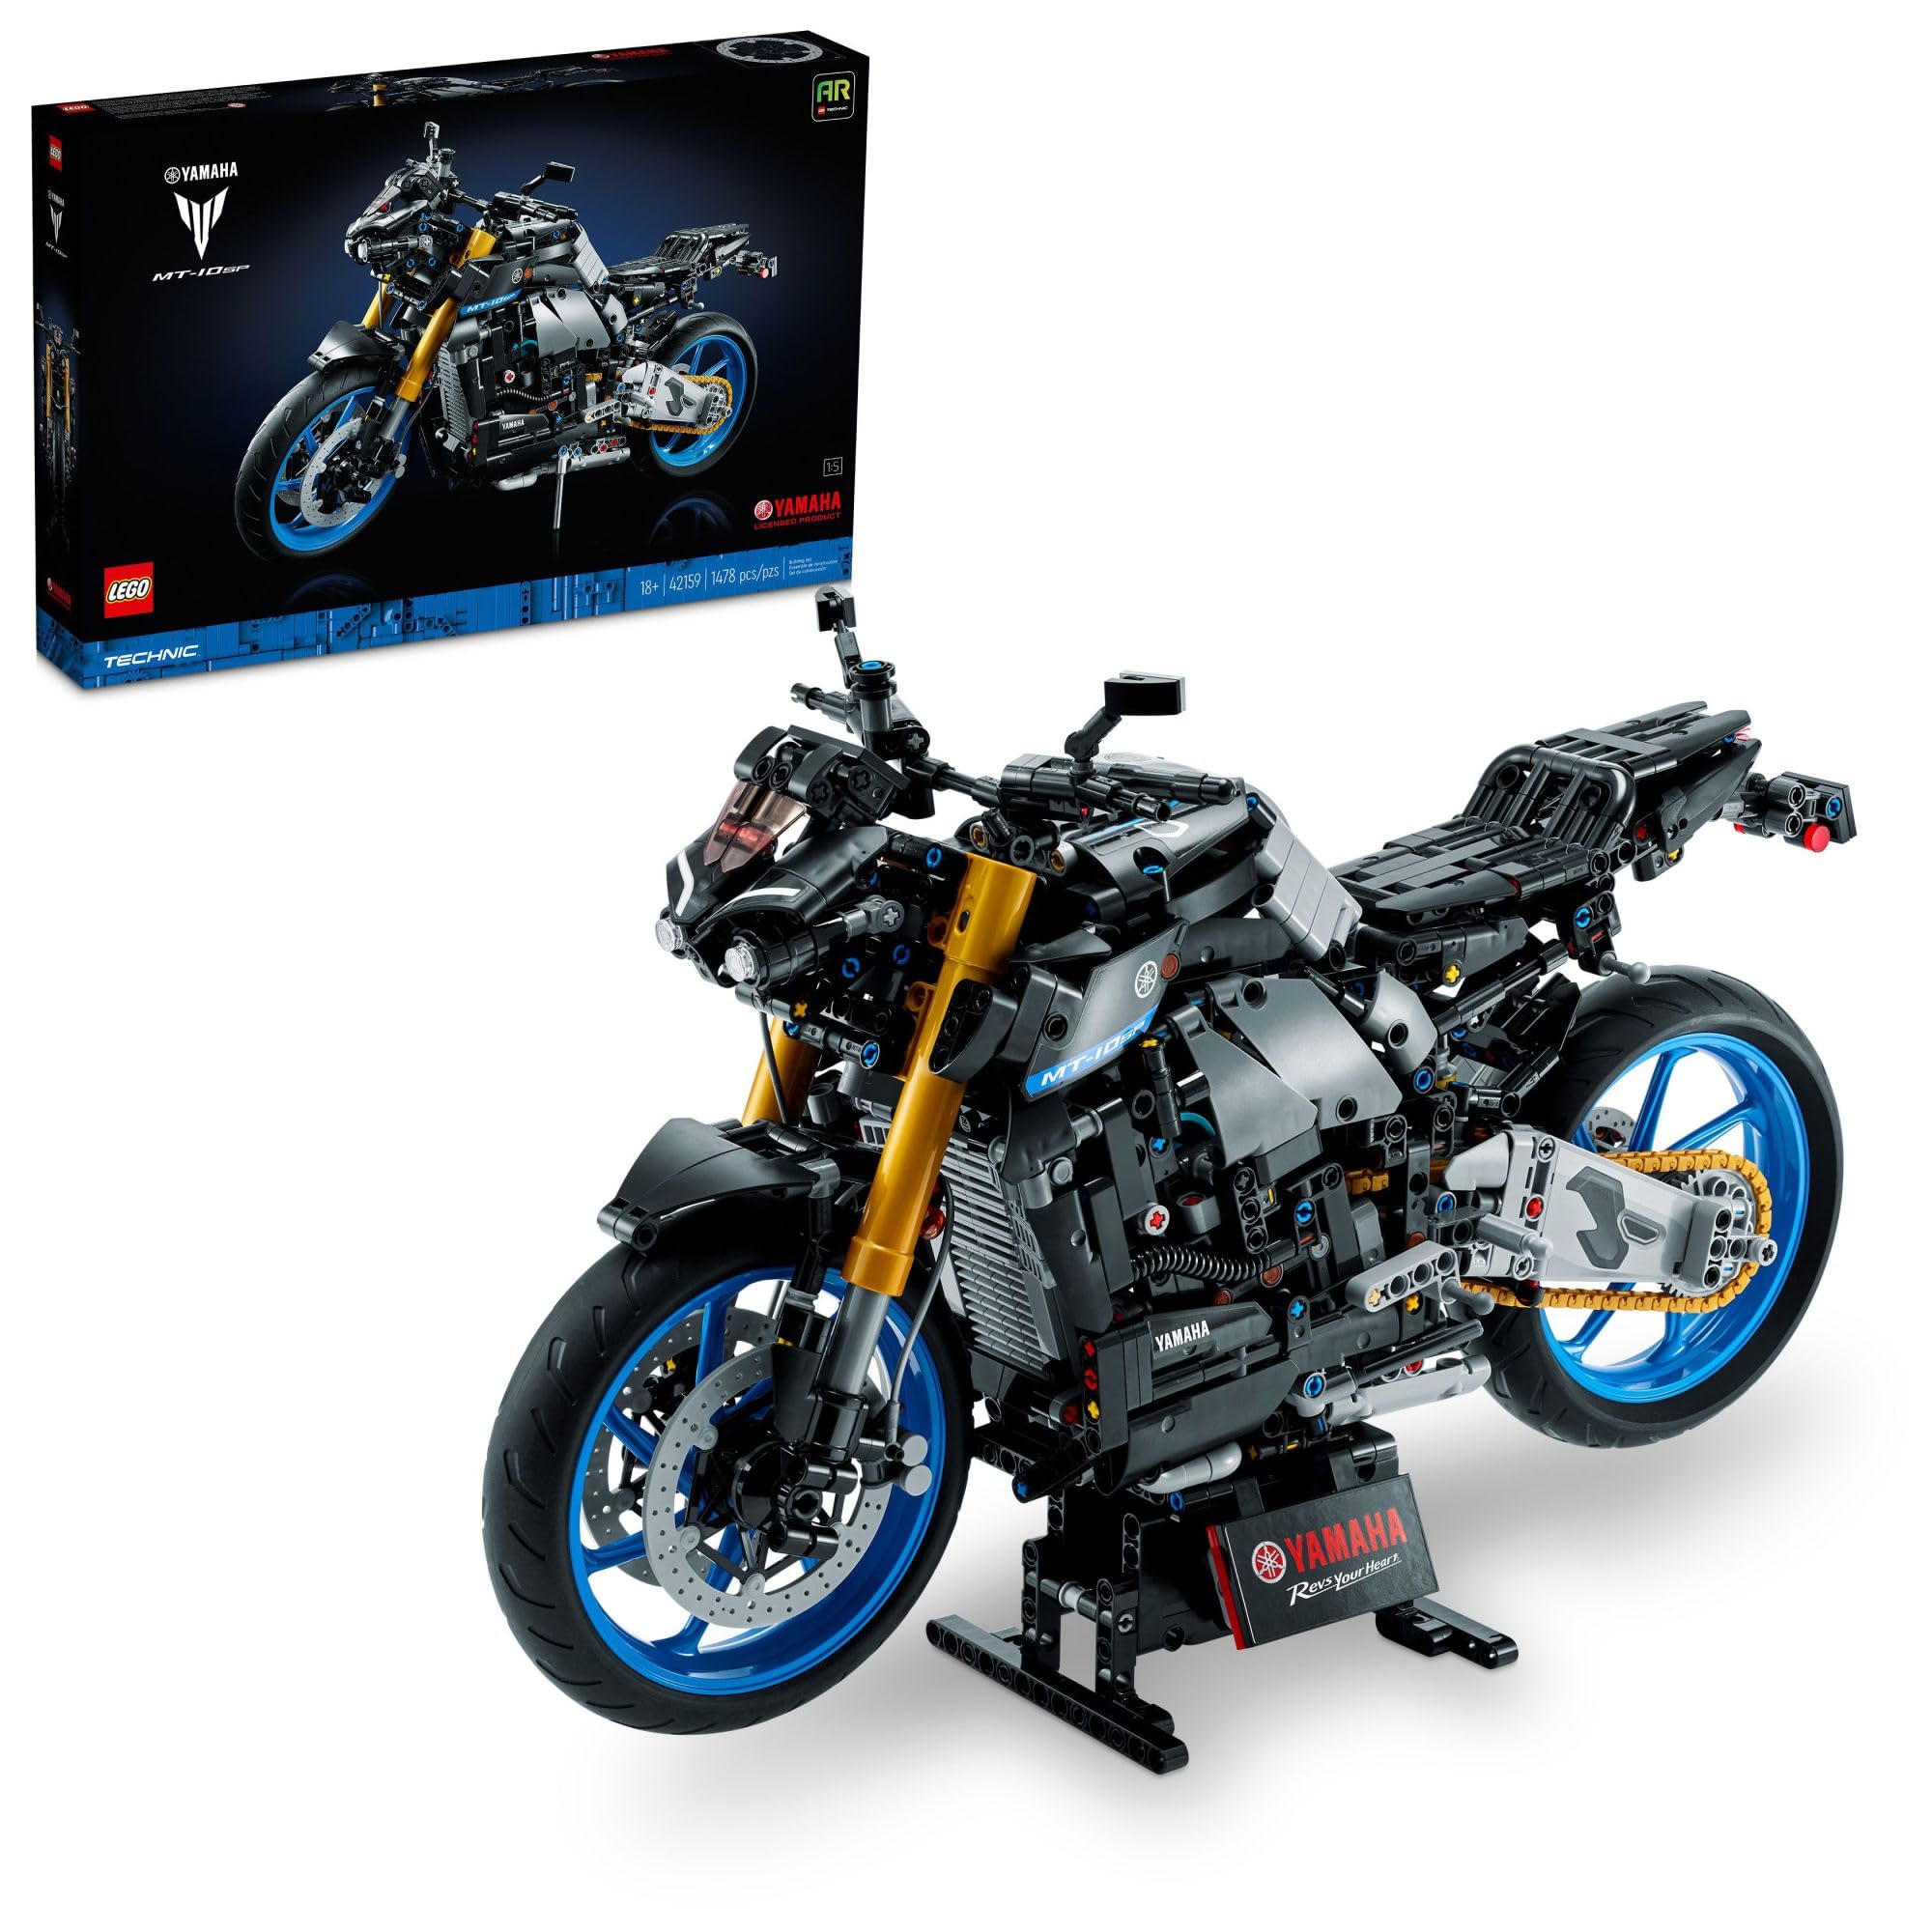 LEGO Technic Yamaha MT-10 SP 42159 Advanced Building Set for Adults, This Iconic Motorcycle Model for Build and Display Makes a Great Gift for Fans of Yamaha Vehicles or Motorcycle Collectibles